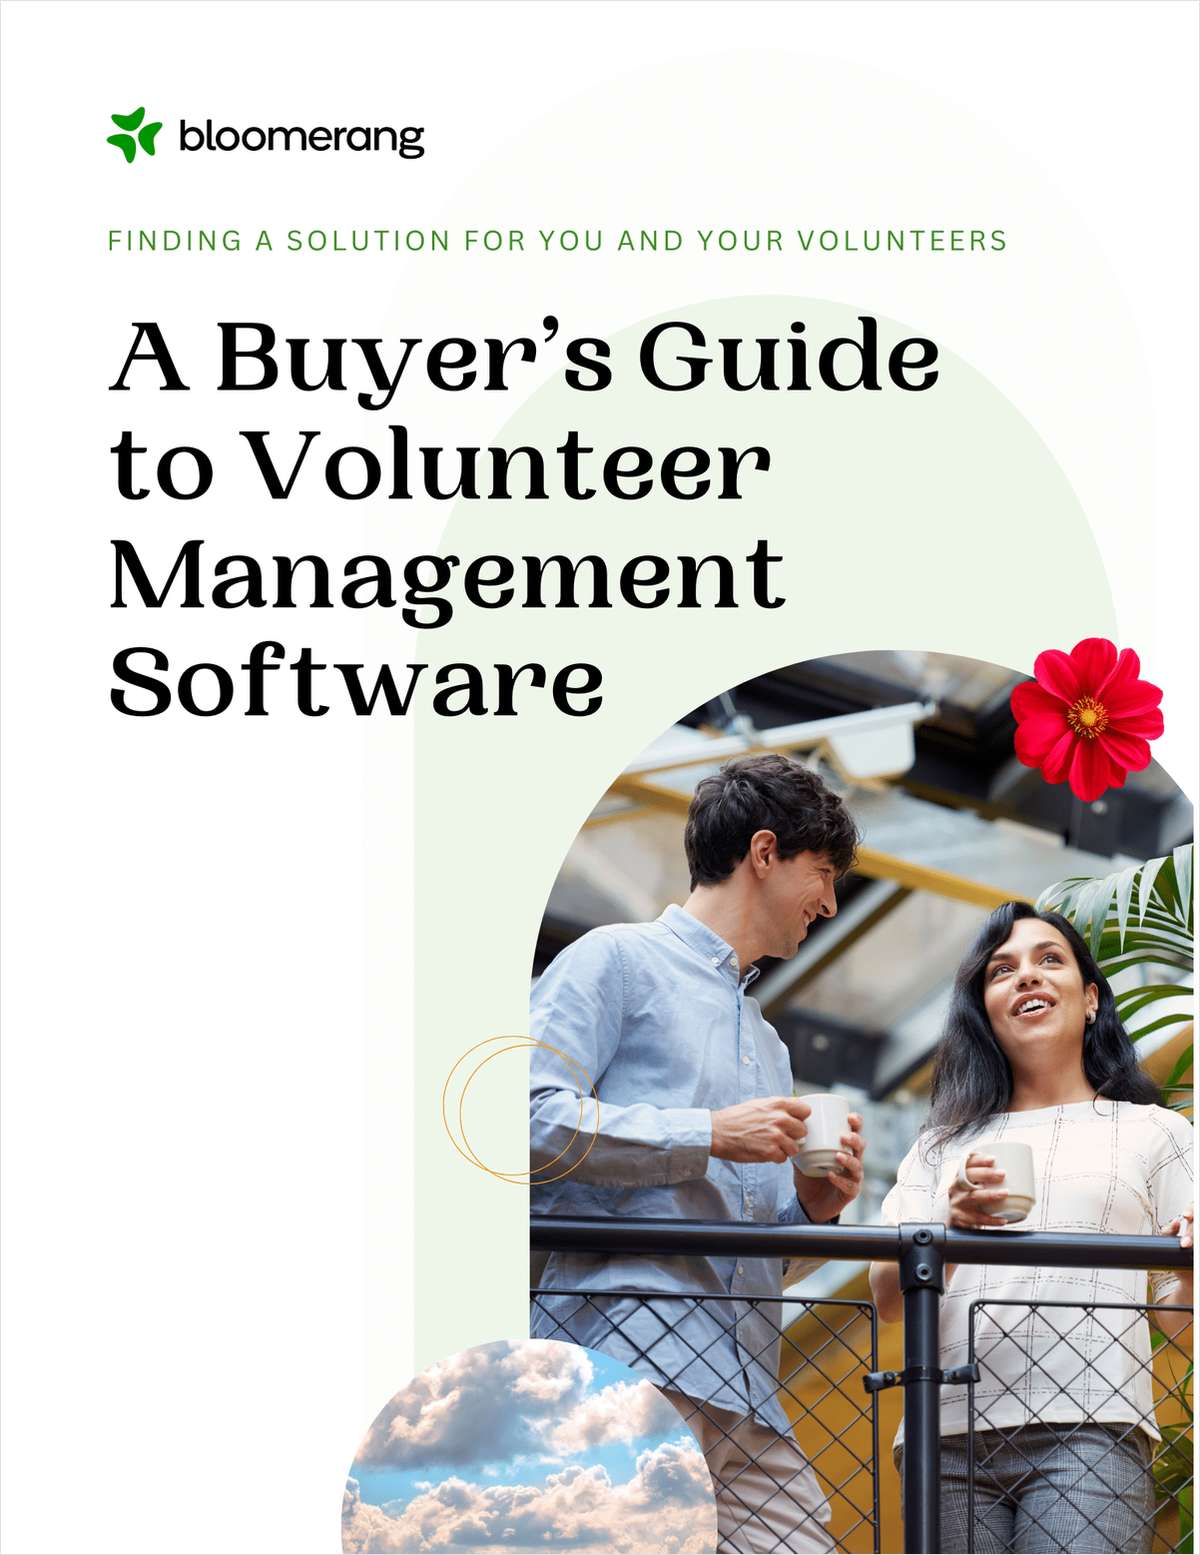 The Buyer's Guide to Volunteer Management Software